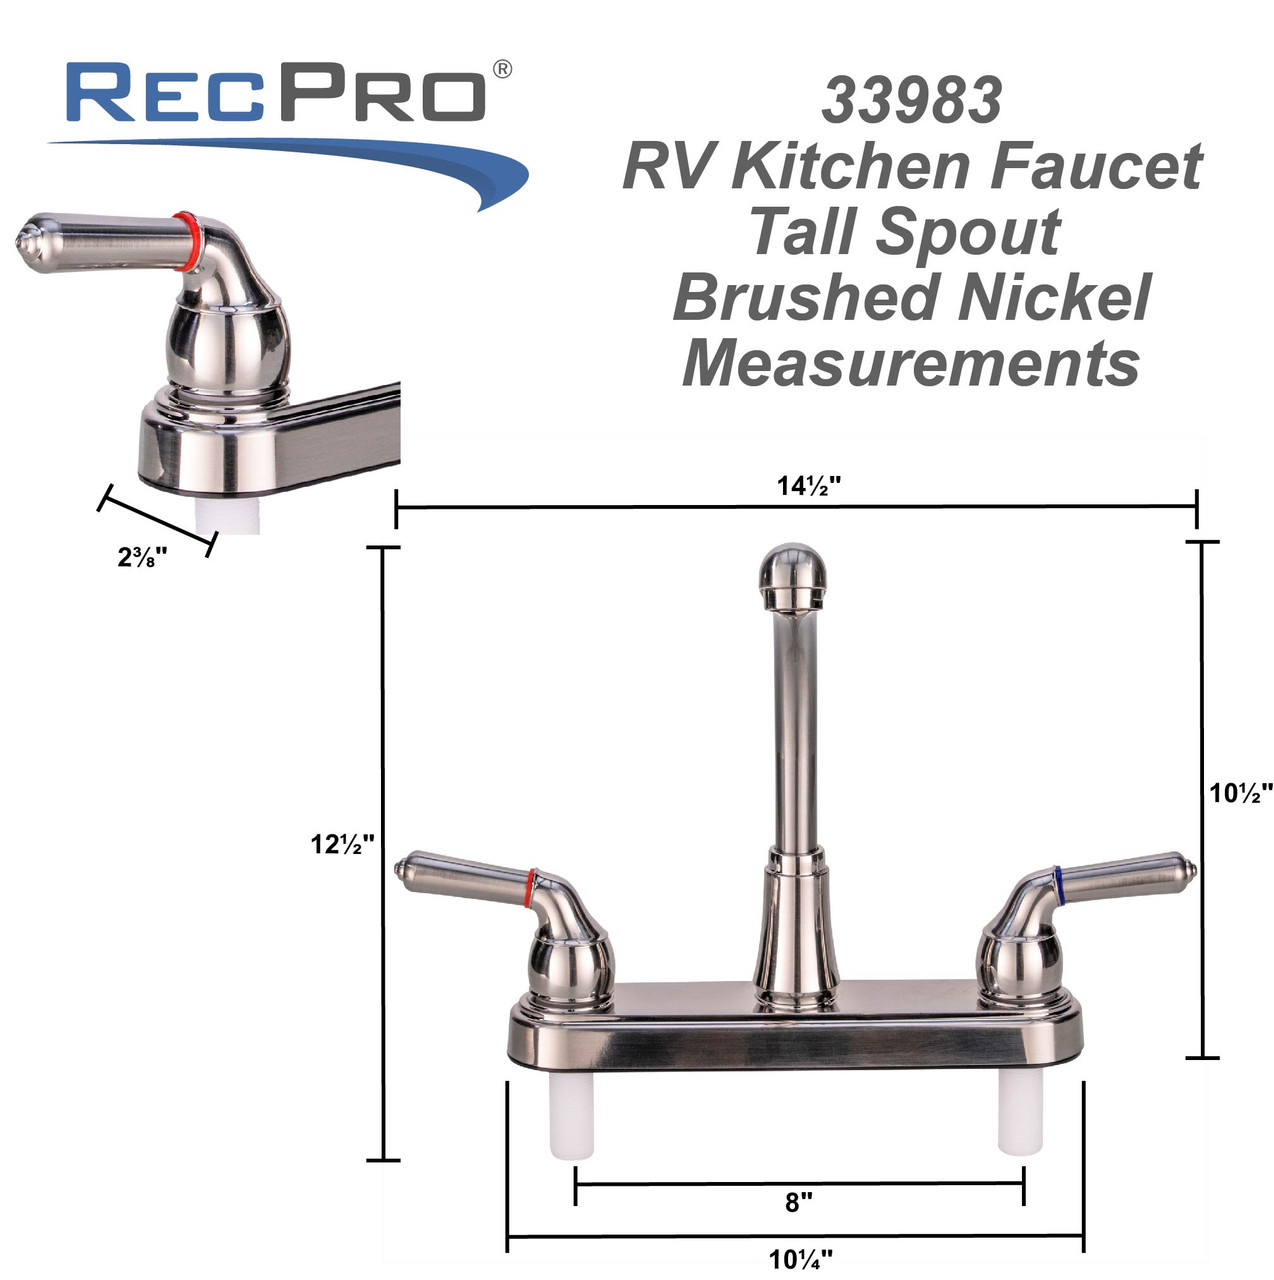 https://cdn11.bigcommerce.com/s-kwuh809851/images/stencil/1280x1280/products/474/18275/33983_RV_Kitchen_Faucet_Tall_Spout_Measurements__33194.1695821742.jpg?c=2&imbypass=on